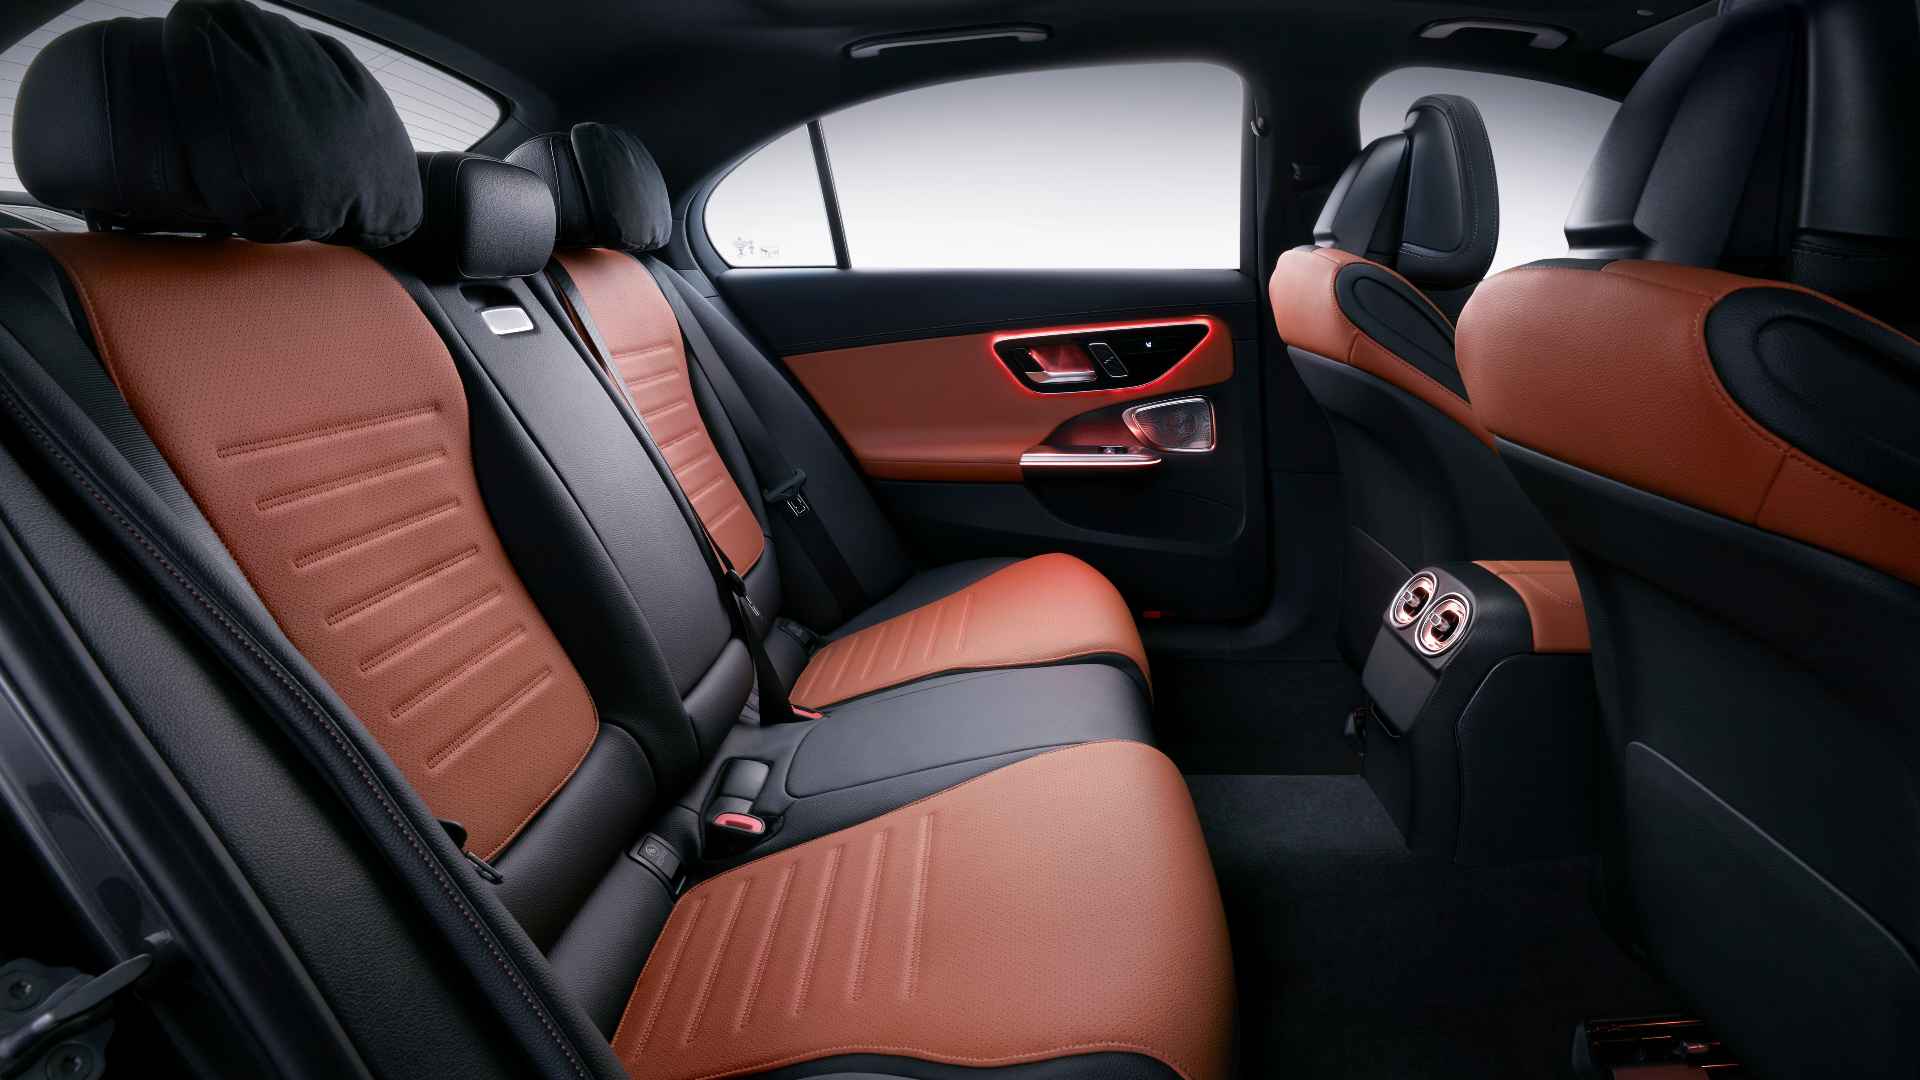 89 mm increase in wheelbase frees up more room for rear seat passengers. Image: Mercedes-Benz